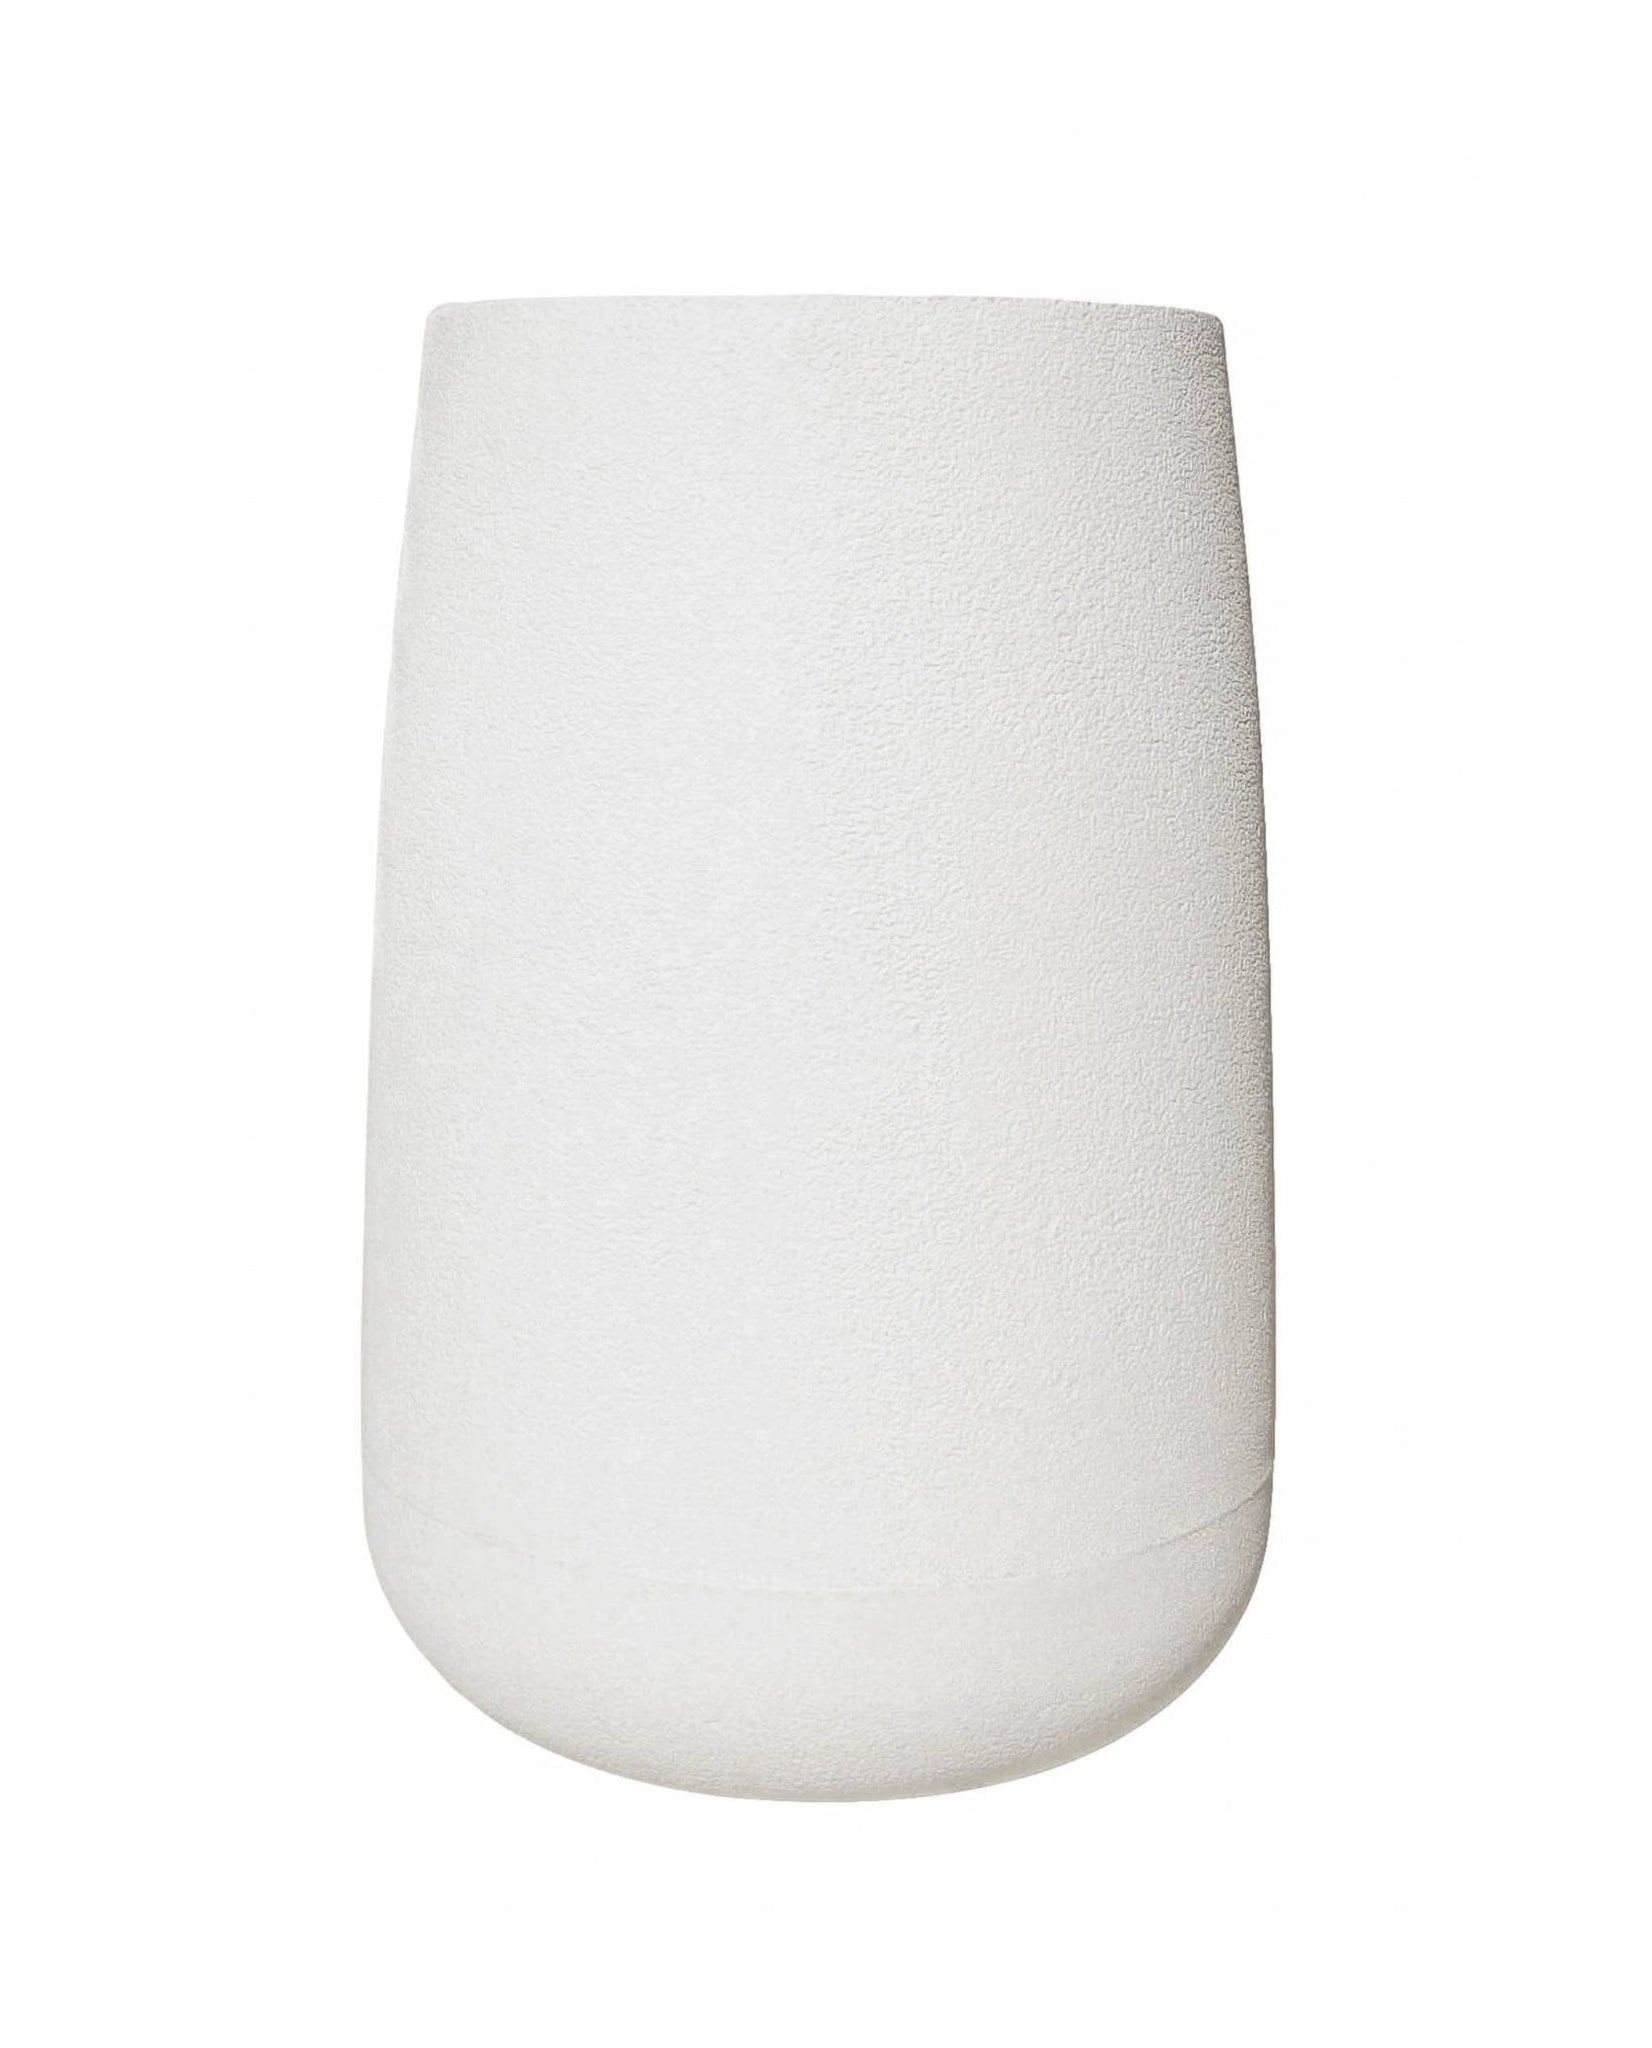 Tall Bios plant pot side view showing the beautiful shape and straight lines of the modern architectural planter, in colour off-white. Orders at Florastyle by Hingham.